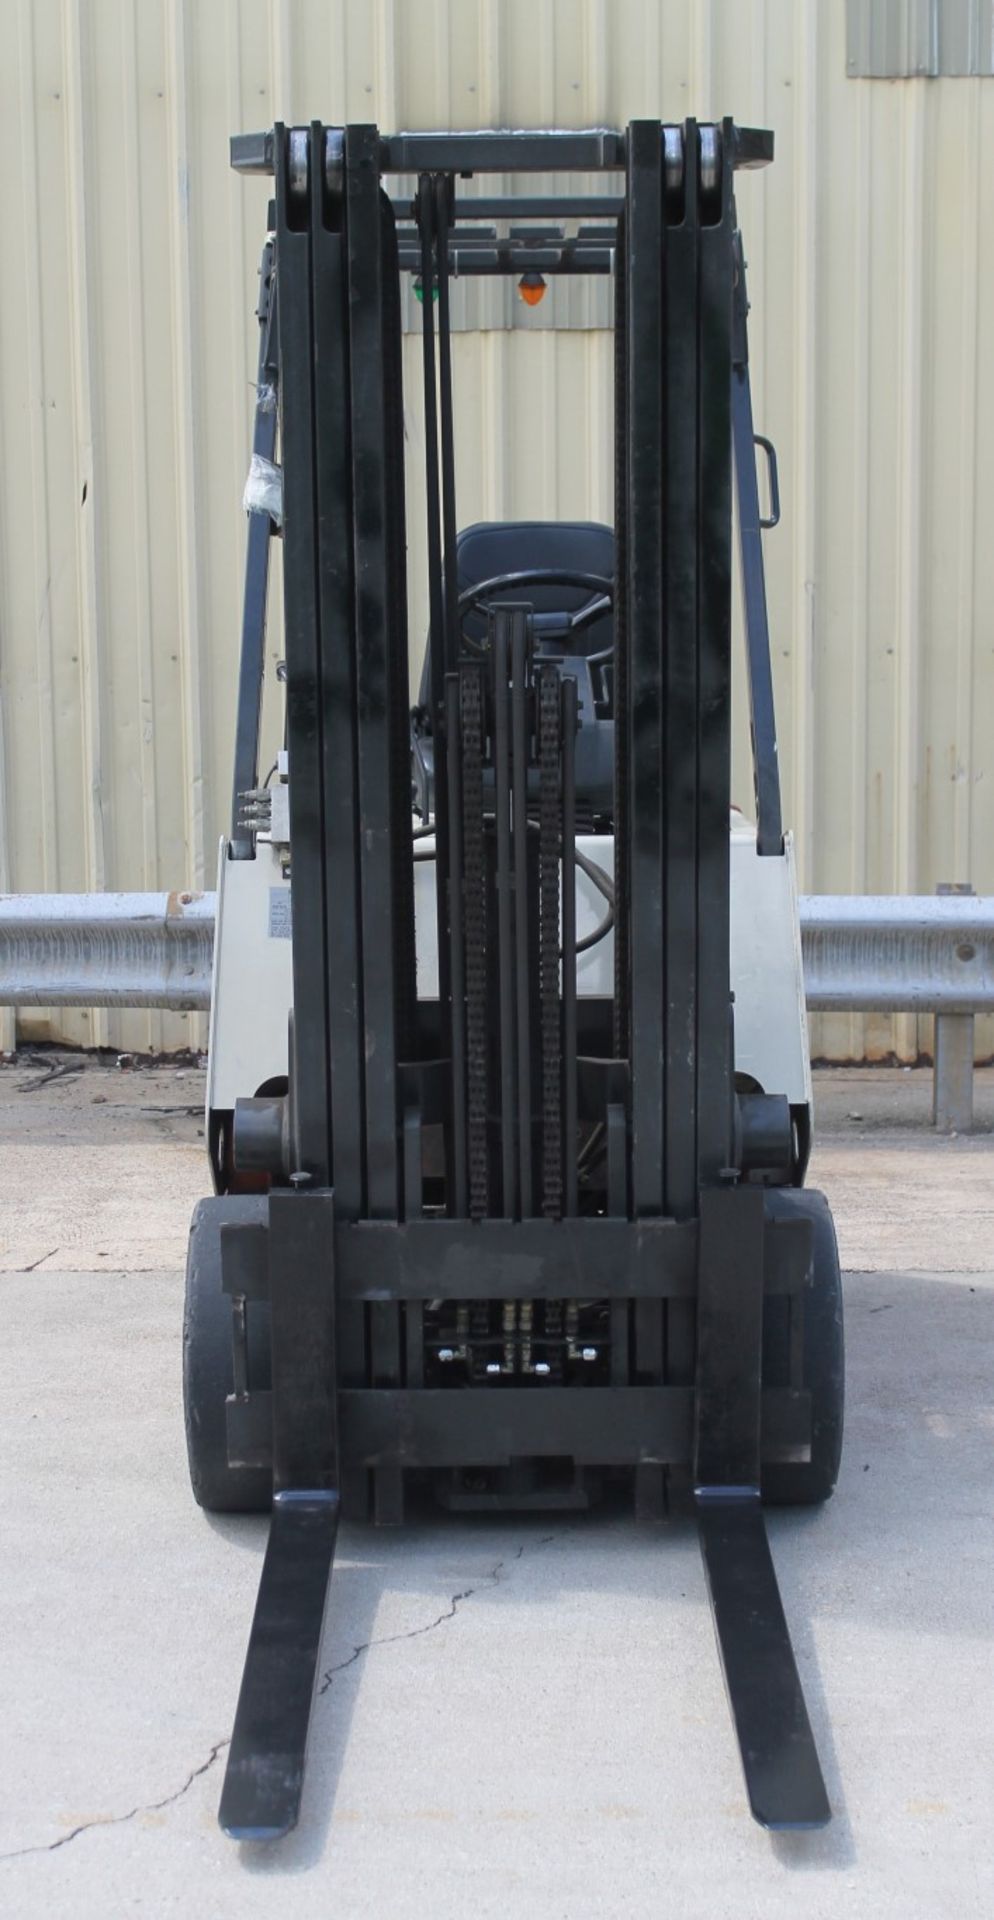 2004 NISSAN 4000 LBS CAPACITY ELECTRIC FORKLIFT WITH 2012 BATTERY, (WATCH VIDEO) - Image 2 of 5